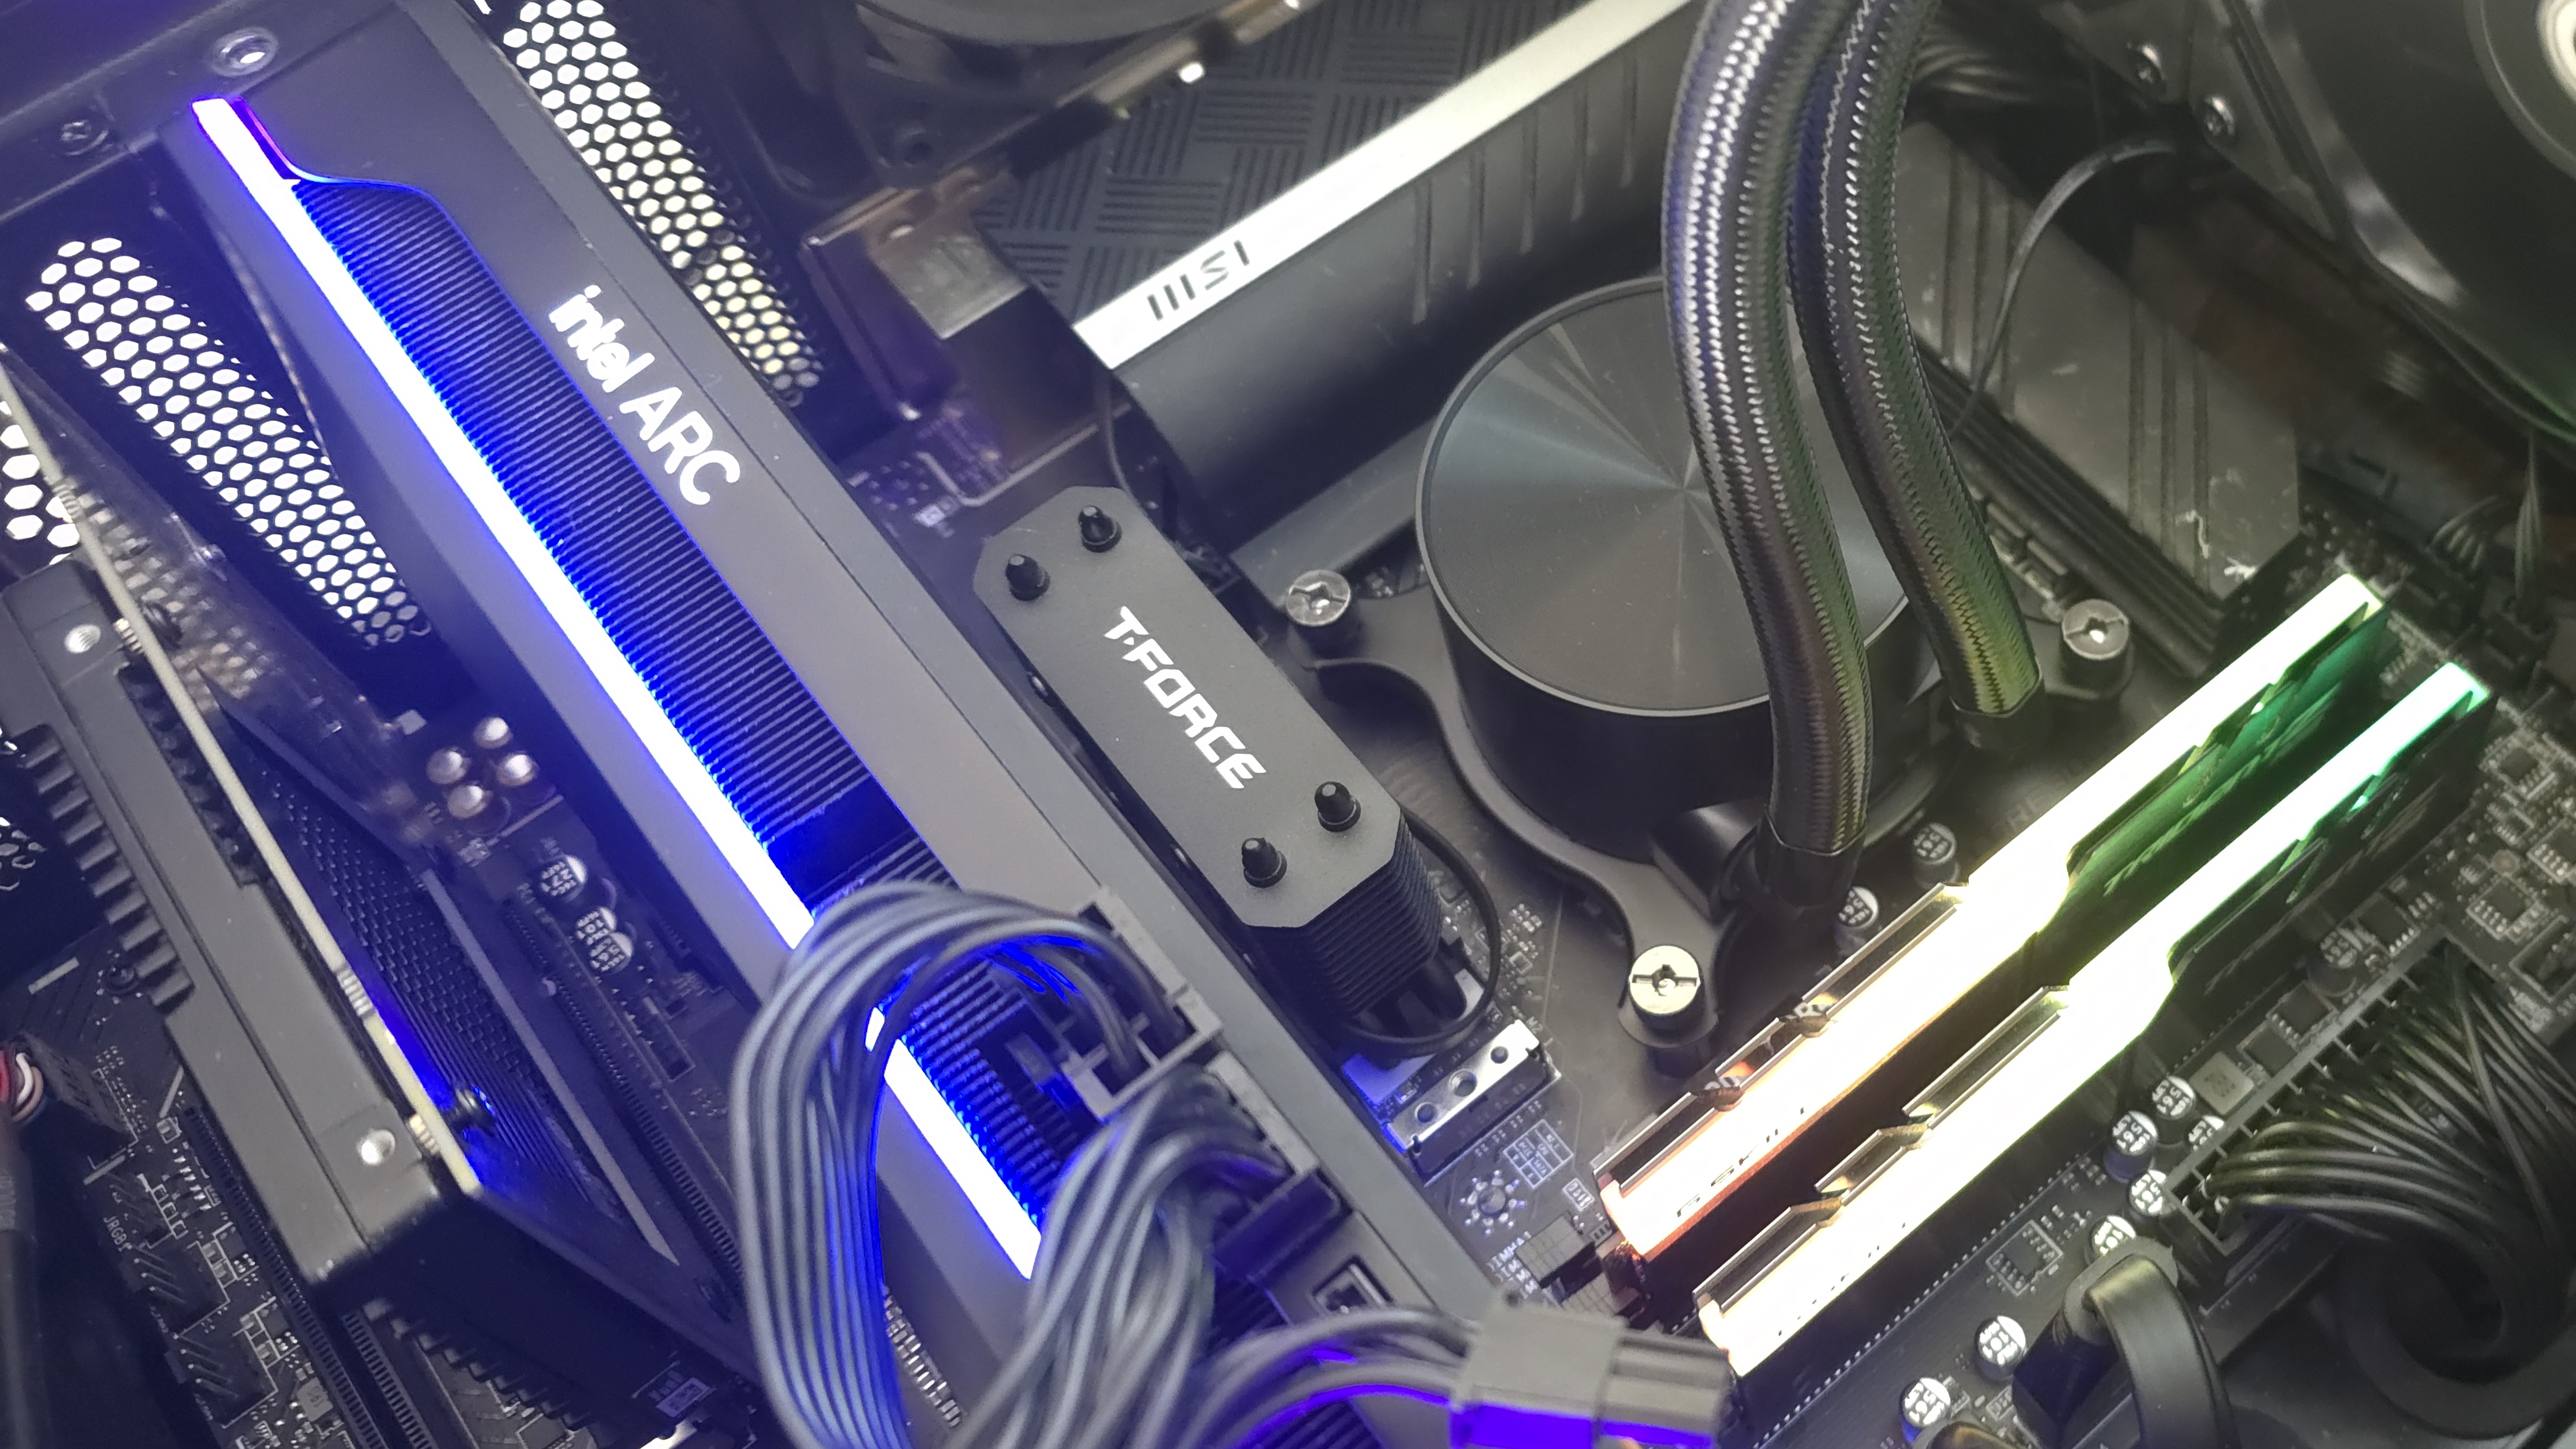 TeamGroup T-Force Dark AirFlow I SSD Cooler